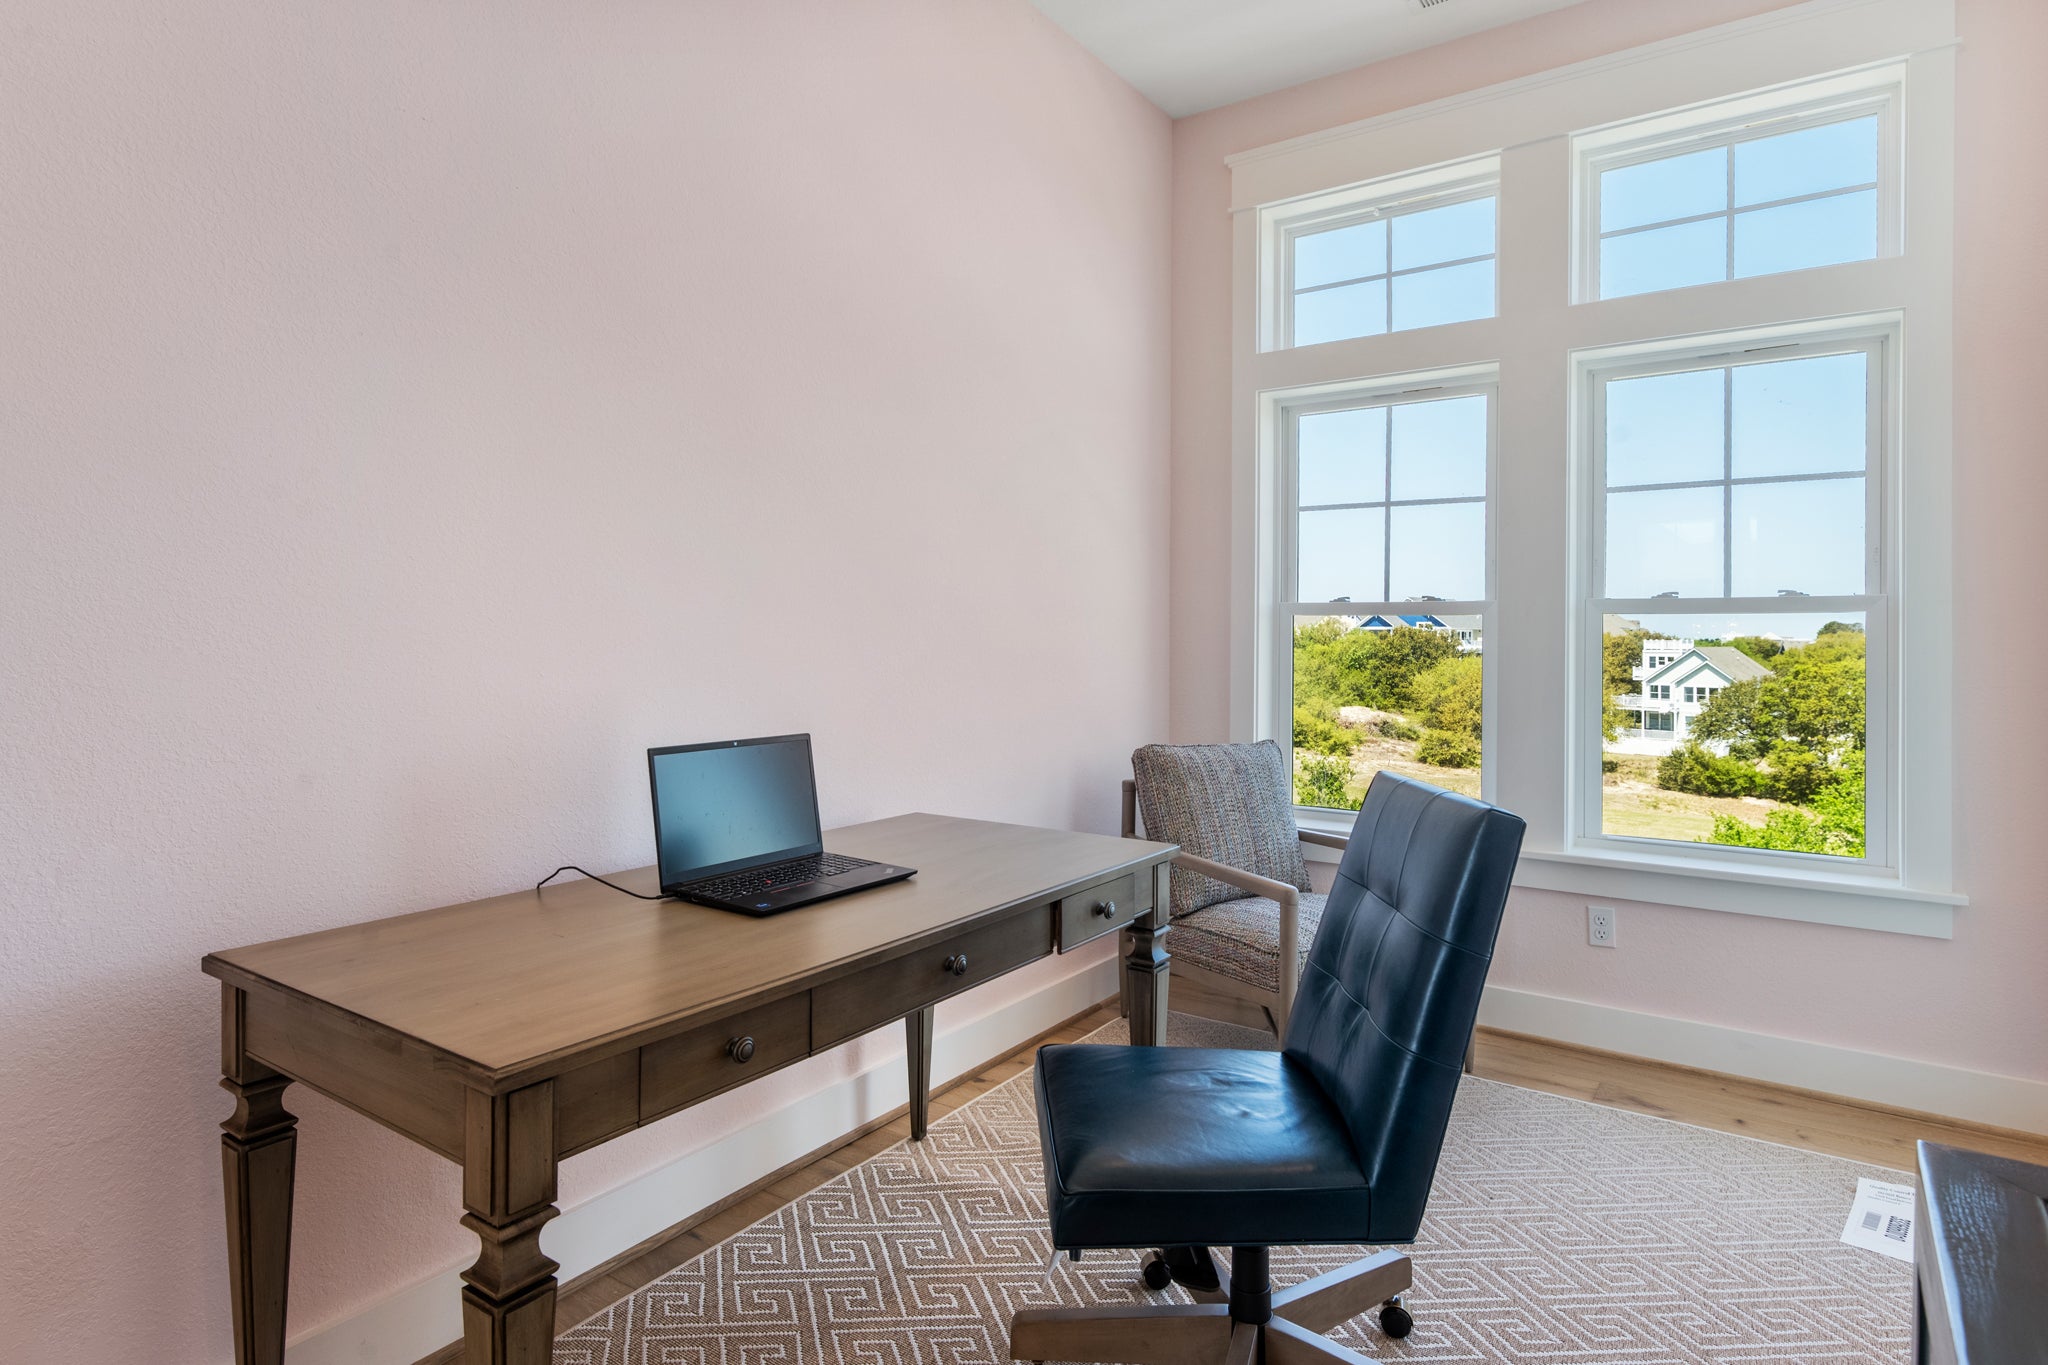 CC214: Currituck Club 214 | Top Level Office - Laptop Not Available For Guest Use